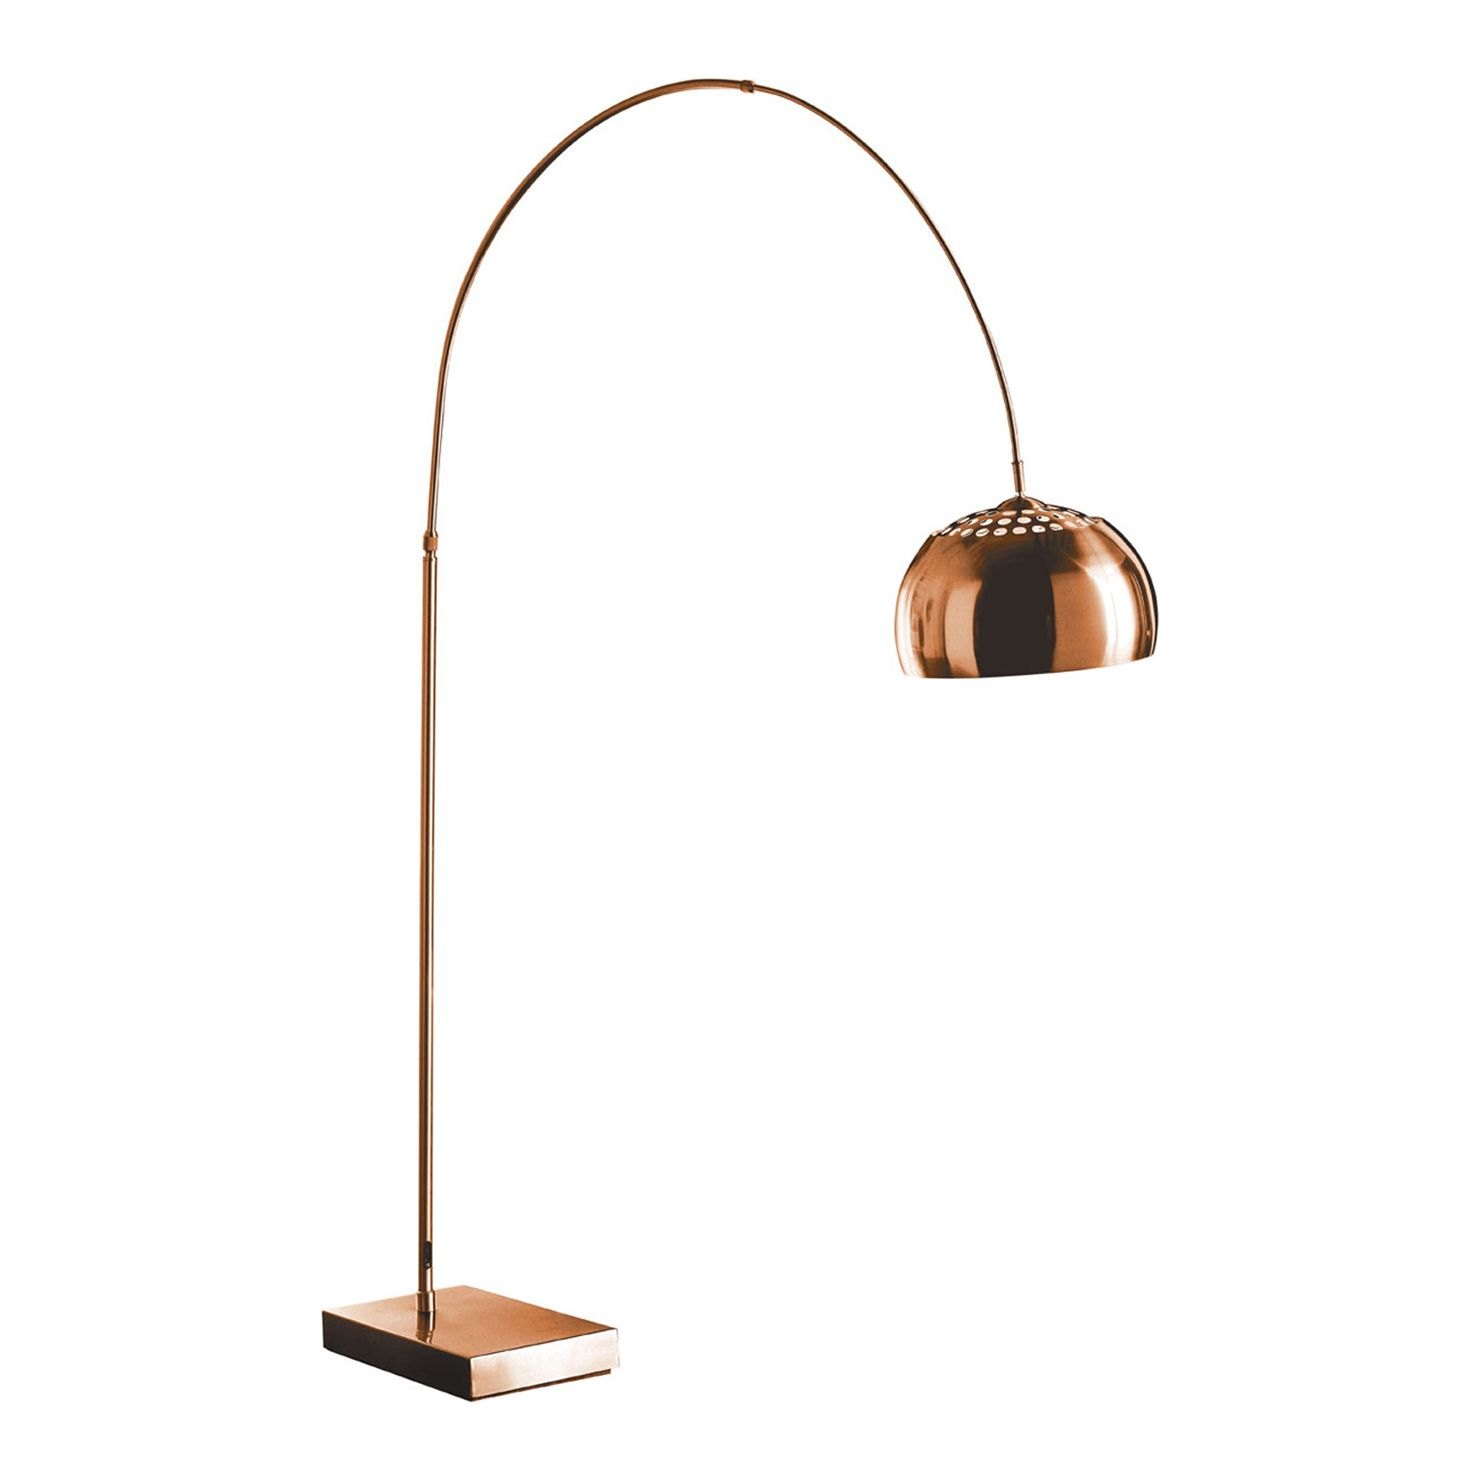 Strata Arched Floor Lamp Copper Marble Finish Achica within dimensions 1480 X 1480